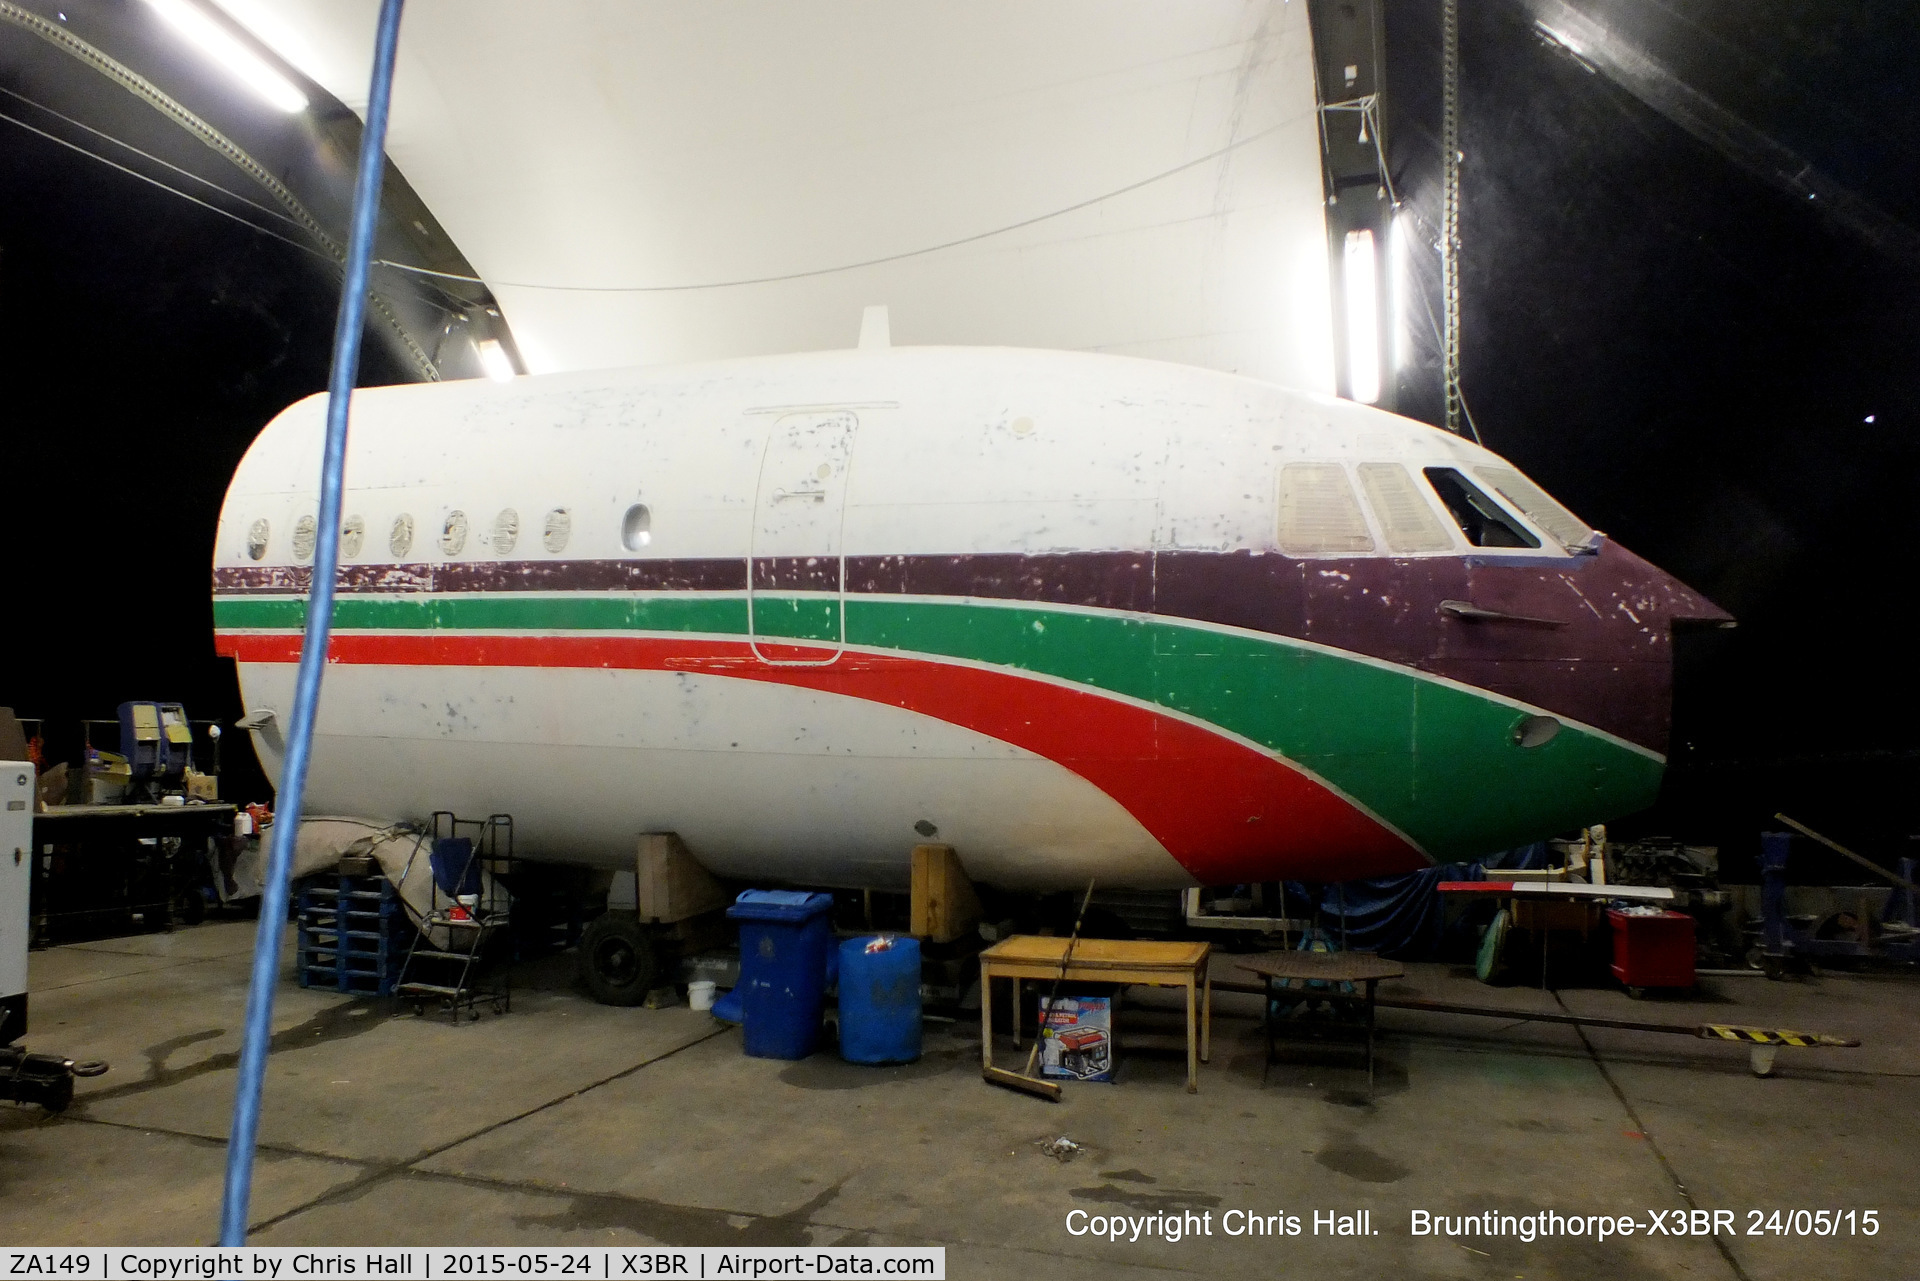 ZA149, 1967 Vickers VC10 K.3 C/N 884, forward fuselage section of VC-10 ZA149 being painted into Gulf Air colours. It will be transported to Bahrain for display